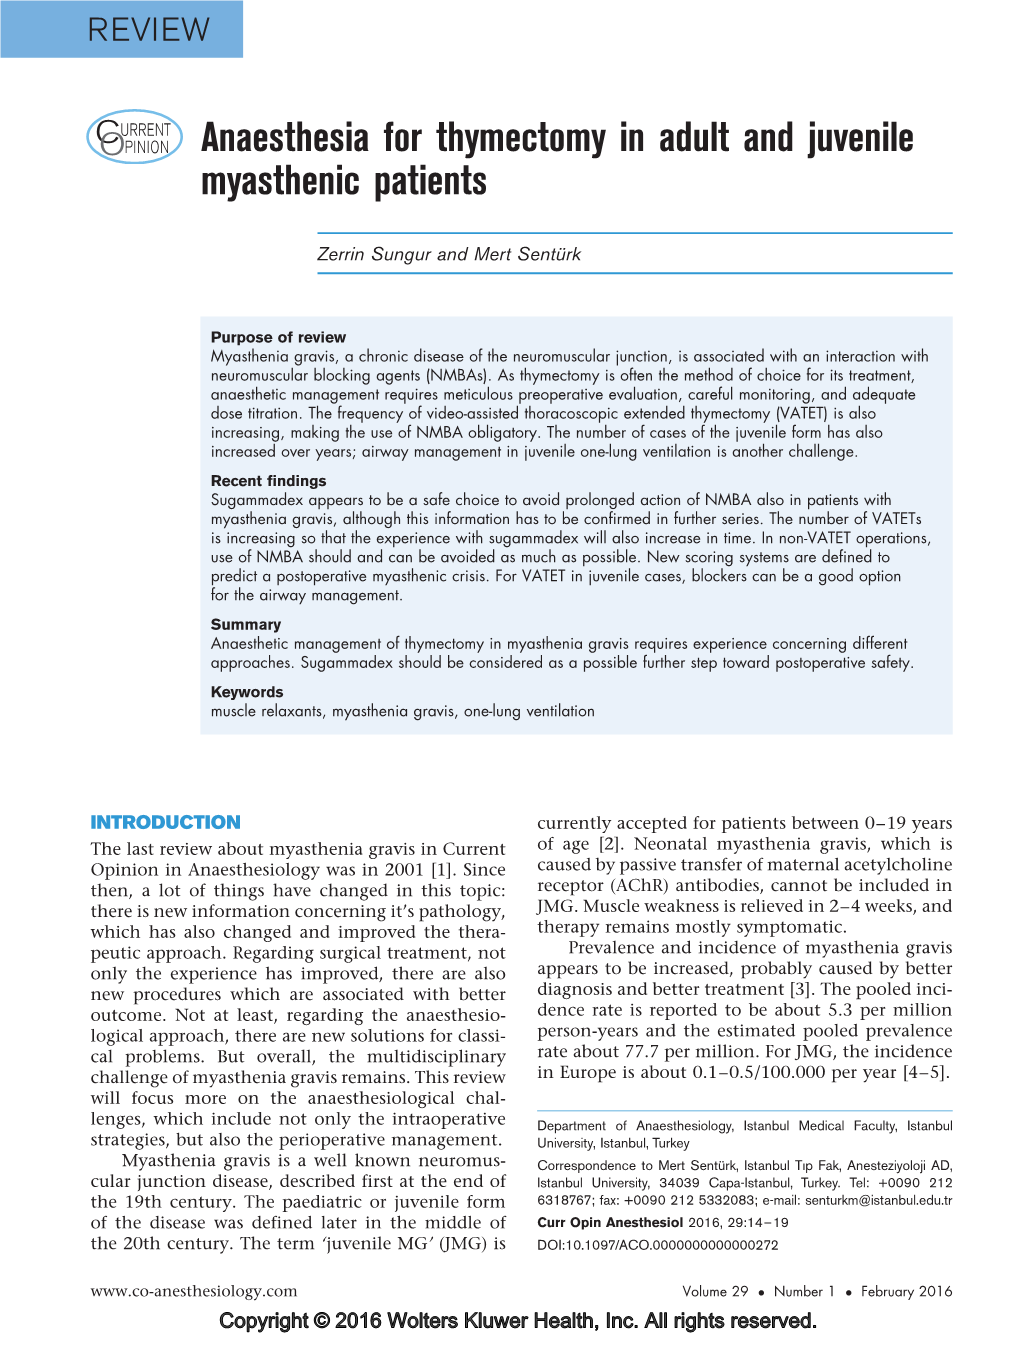 Anaesthesia for Thymectomy in Adult and Juvenile Myasthenic Patients